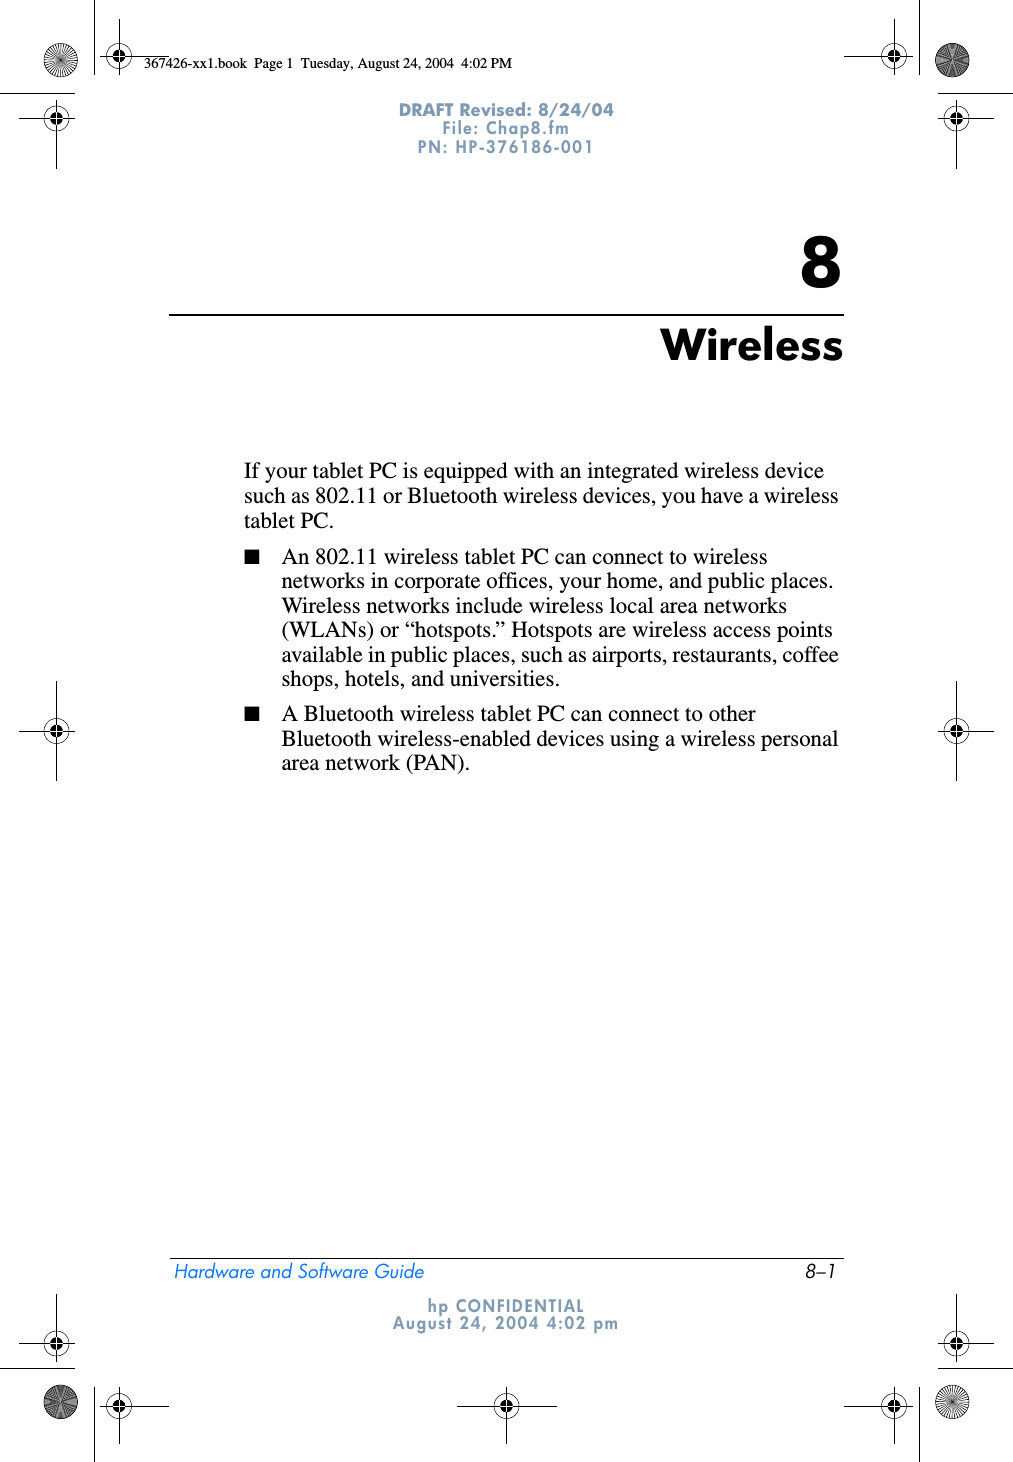 Hardware and Software Guide 8–1DRAFT Revised: 8/24/04File: Chap8.fm PN: HP-376186-001 hp CONFIDENTIALAugust 24, 2004 4:02 pm8WirelessIf your tablet PC is equipped with an integrated wireless device such as 802.11 or Bluetooth wireless devices, you have a wireless tablet PC. ■An 802.11 wireless tablet PC can connect to wireless networks in corporate offices, your home, and public places. Wireless networks include wireless local area networks (WLANs) or “hotspots.” Hotspots are wireless access points available in public places, such as airports, restaurants, coffee shops, hotels, and universities.■A Bluetooth wireless tablet PC can connect to other Bluetooth wireless-enabled devices using a wireless personal area network (PAN).367426-xx1.book  Page 1  Tuesday, August 24, 2004  4:02 PM